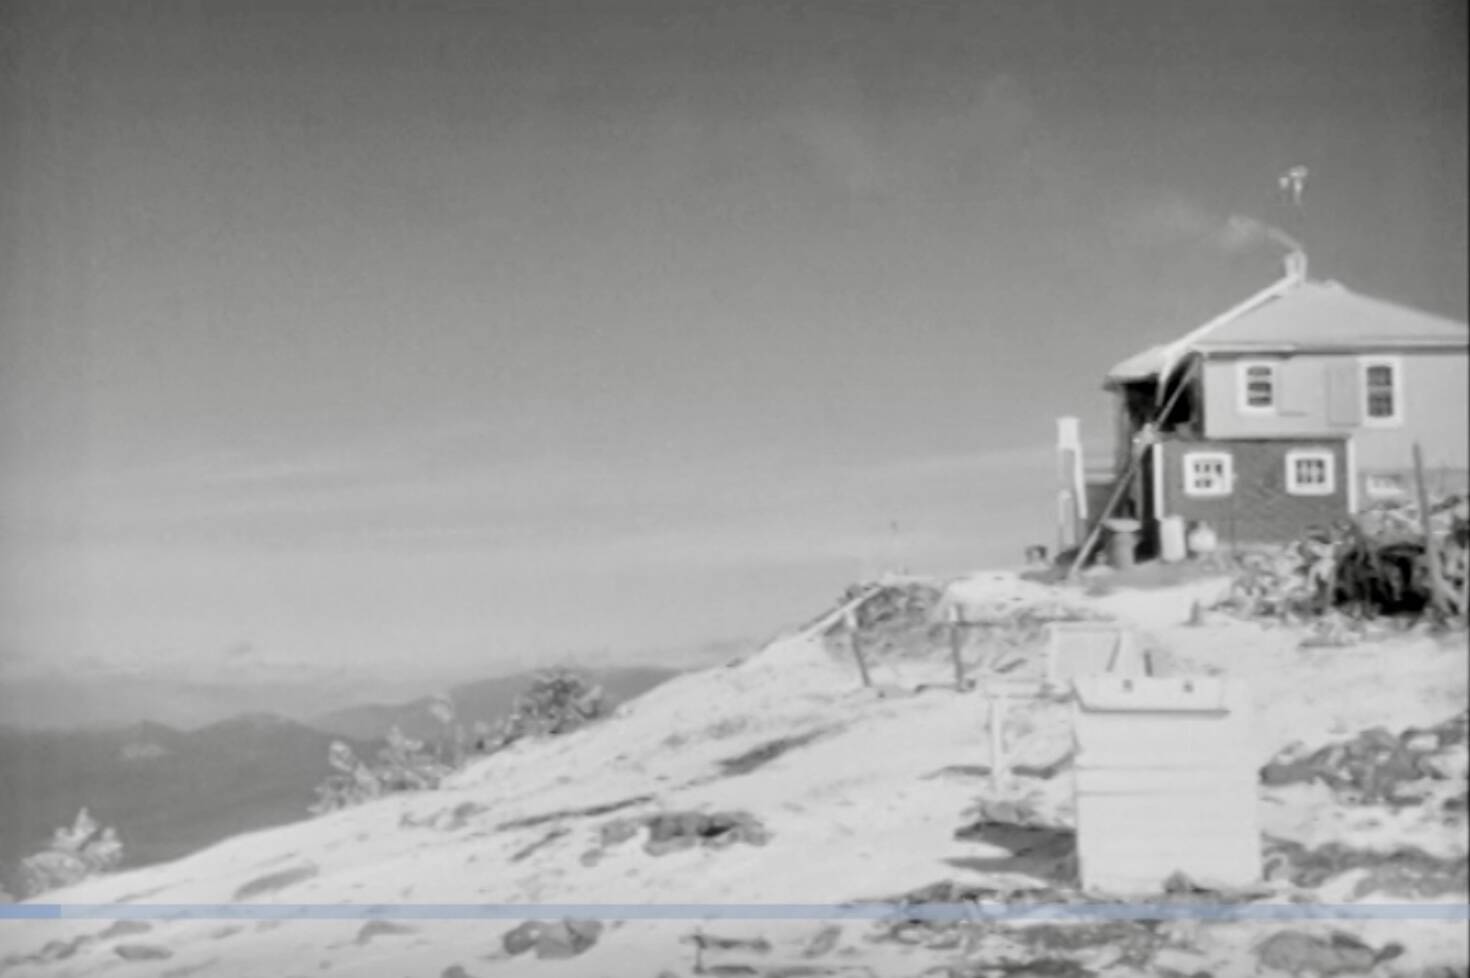 The National Film Board of Canada released a digitized reel of the highest weather station in Canada located atop Old Glory near Rossland.